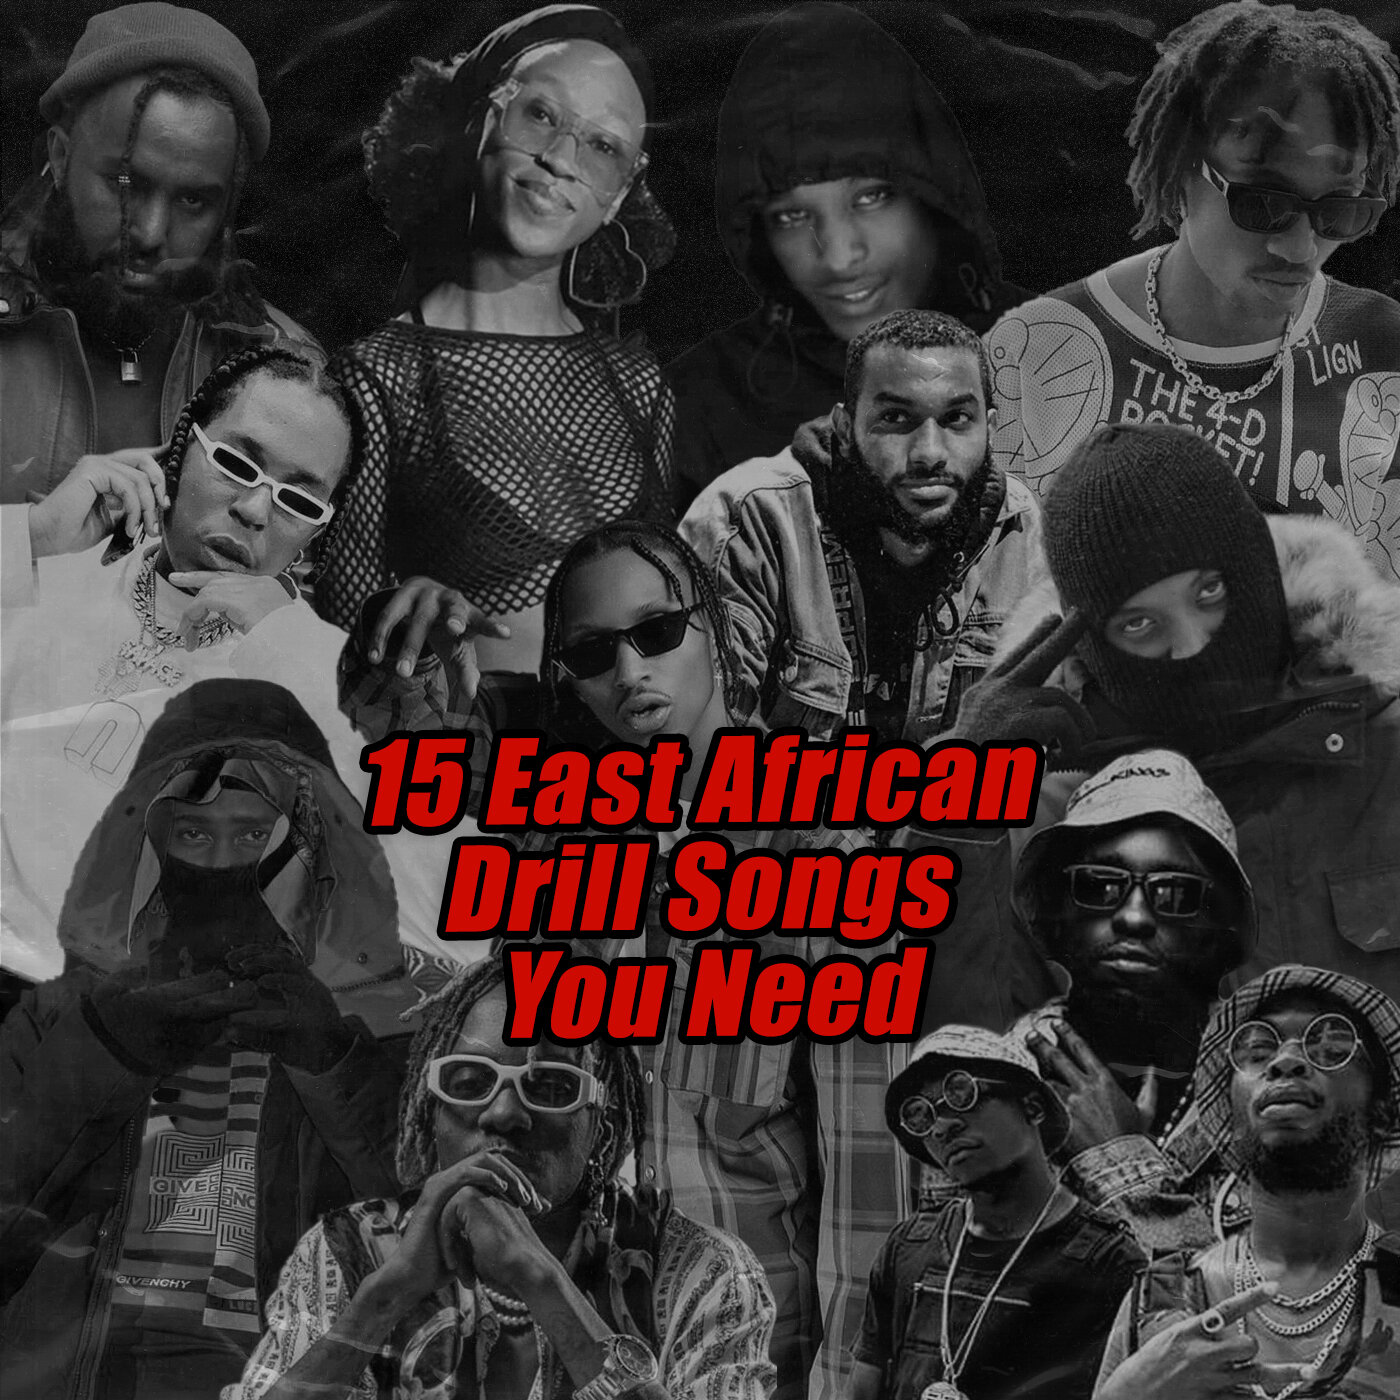 15 East African Drill Songs Need — Tangaza Magazine